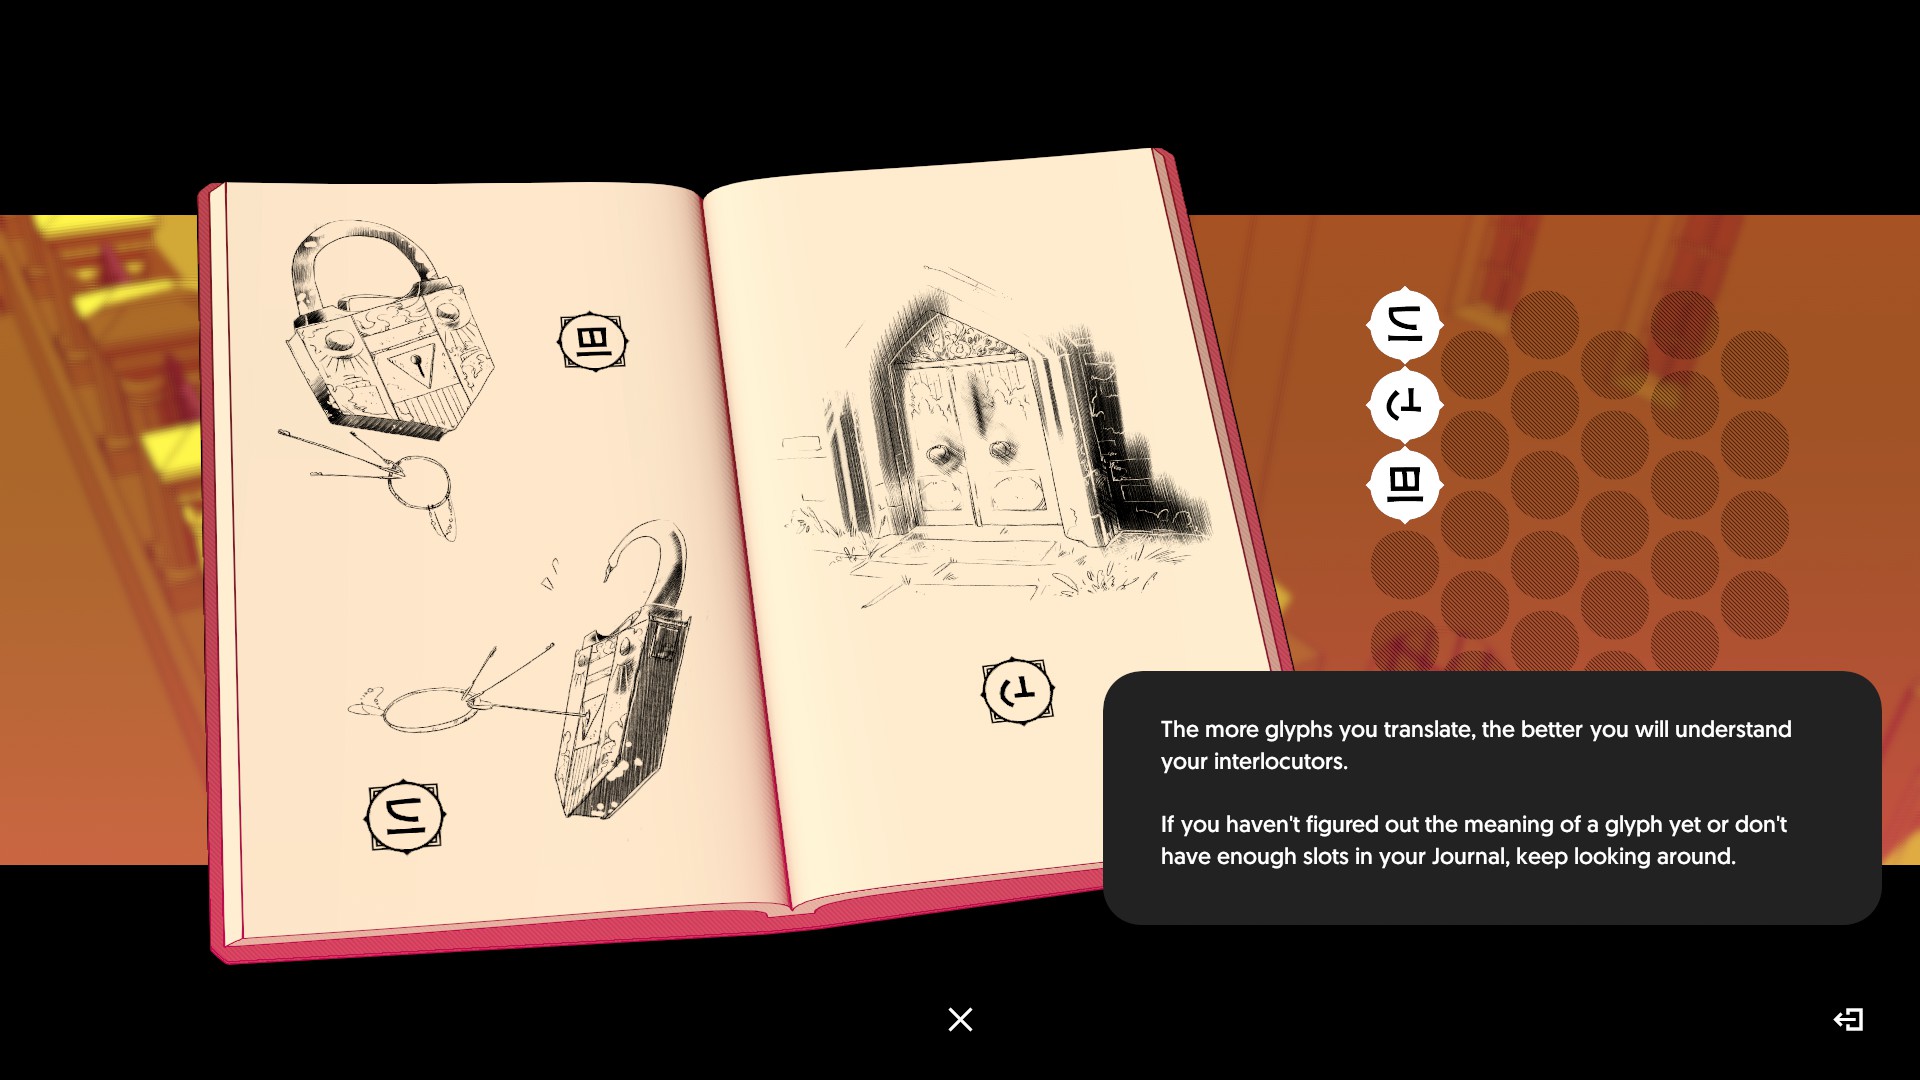 screenshot from the game Chants of Sennaar, showing the in game notebook and instructions for translating glyphs in the game